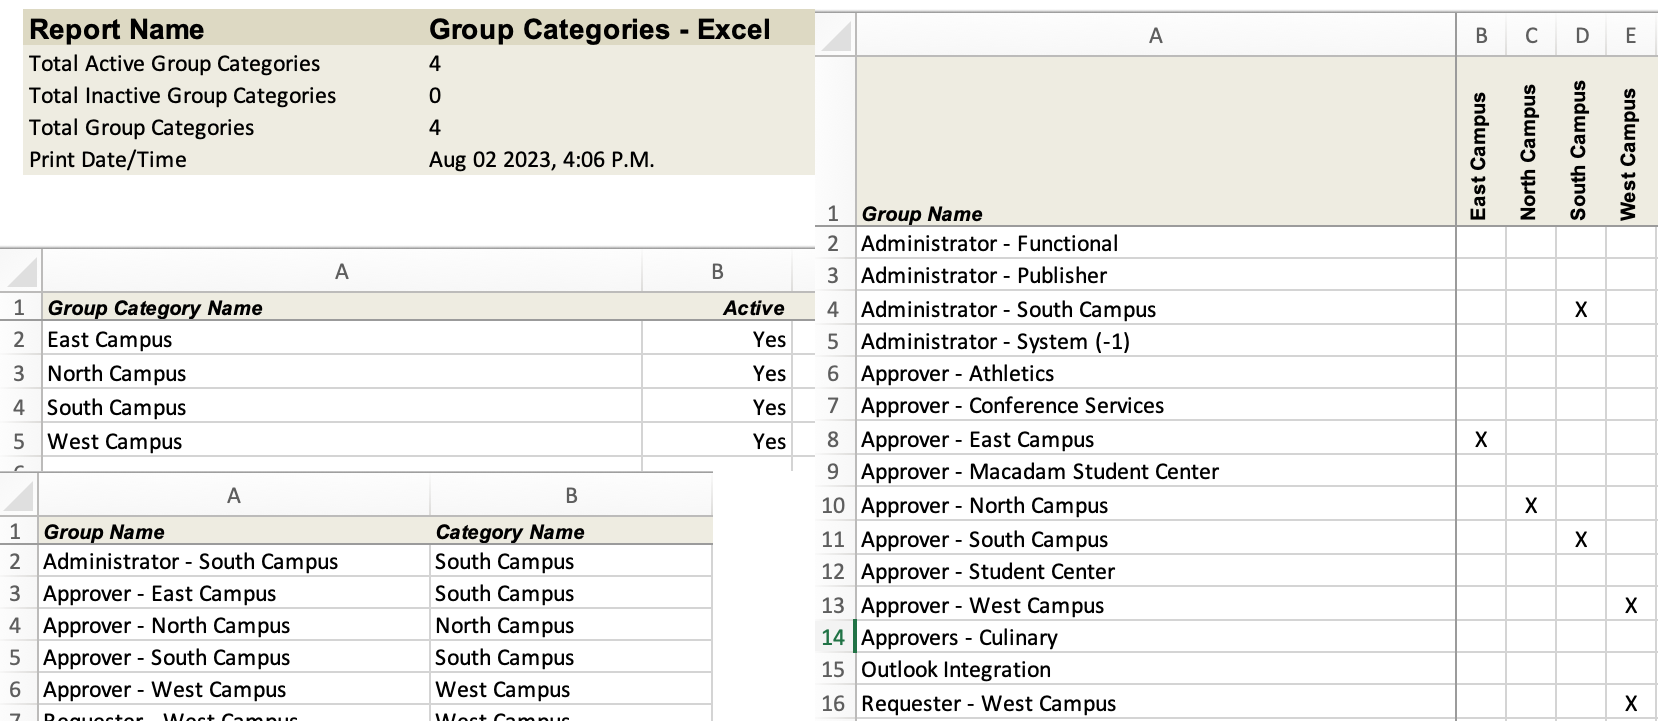 Group categories excel example